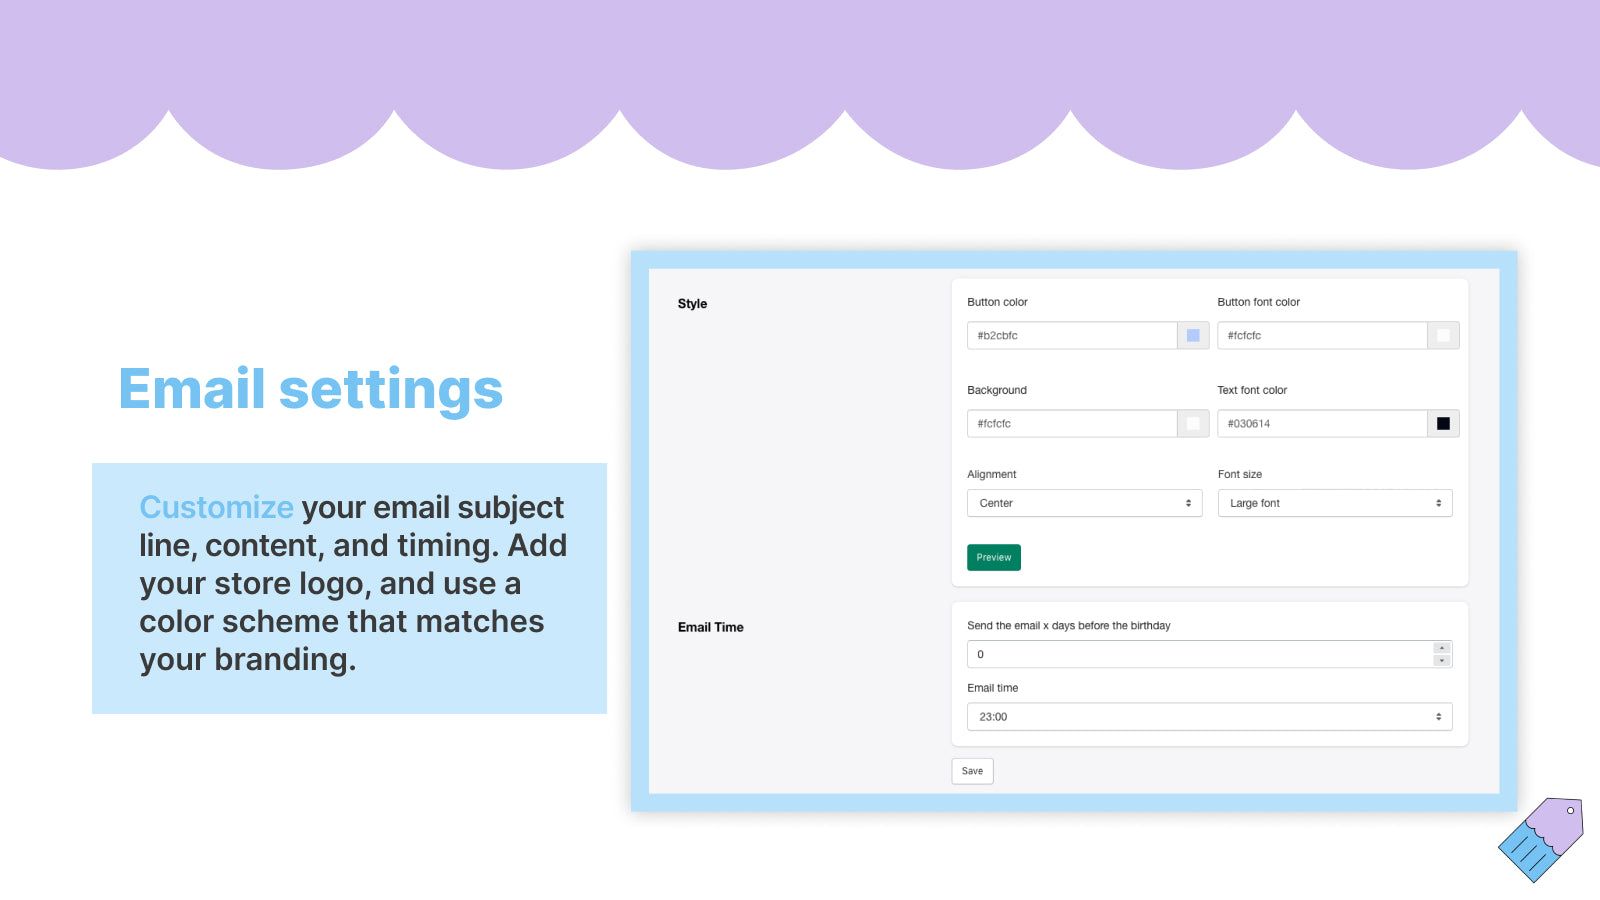 Customize your email subject line, content, design, and timing.